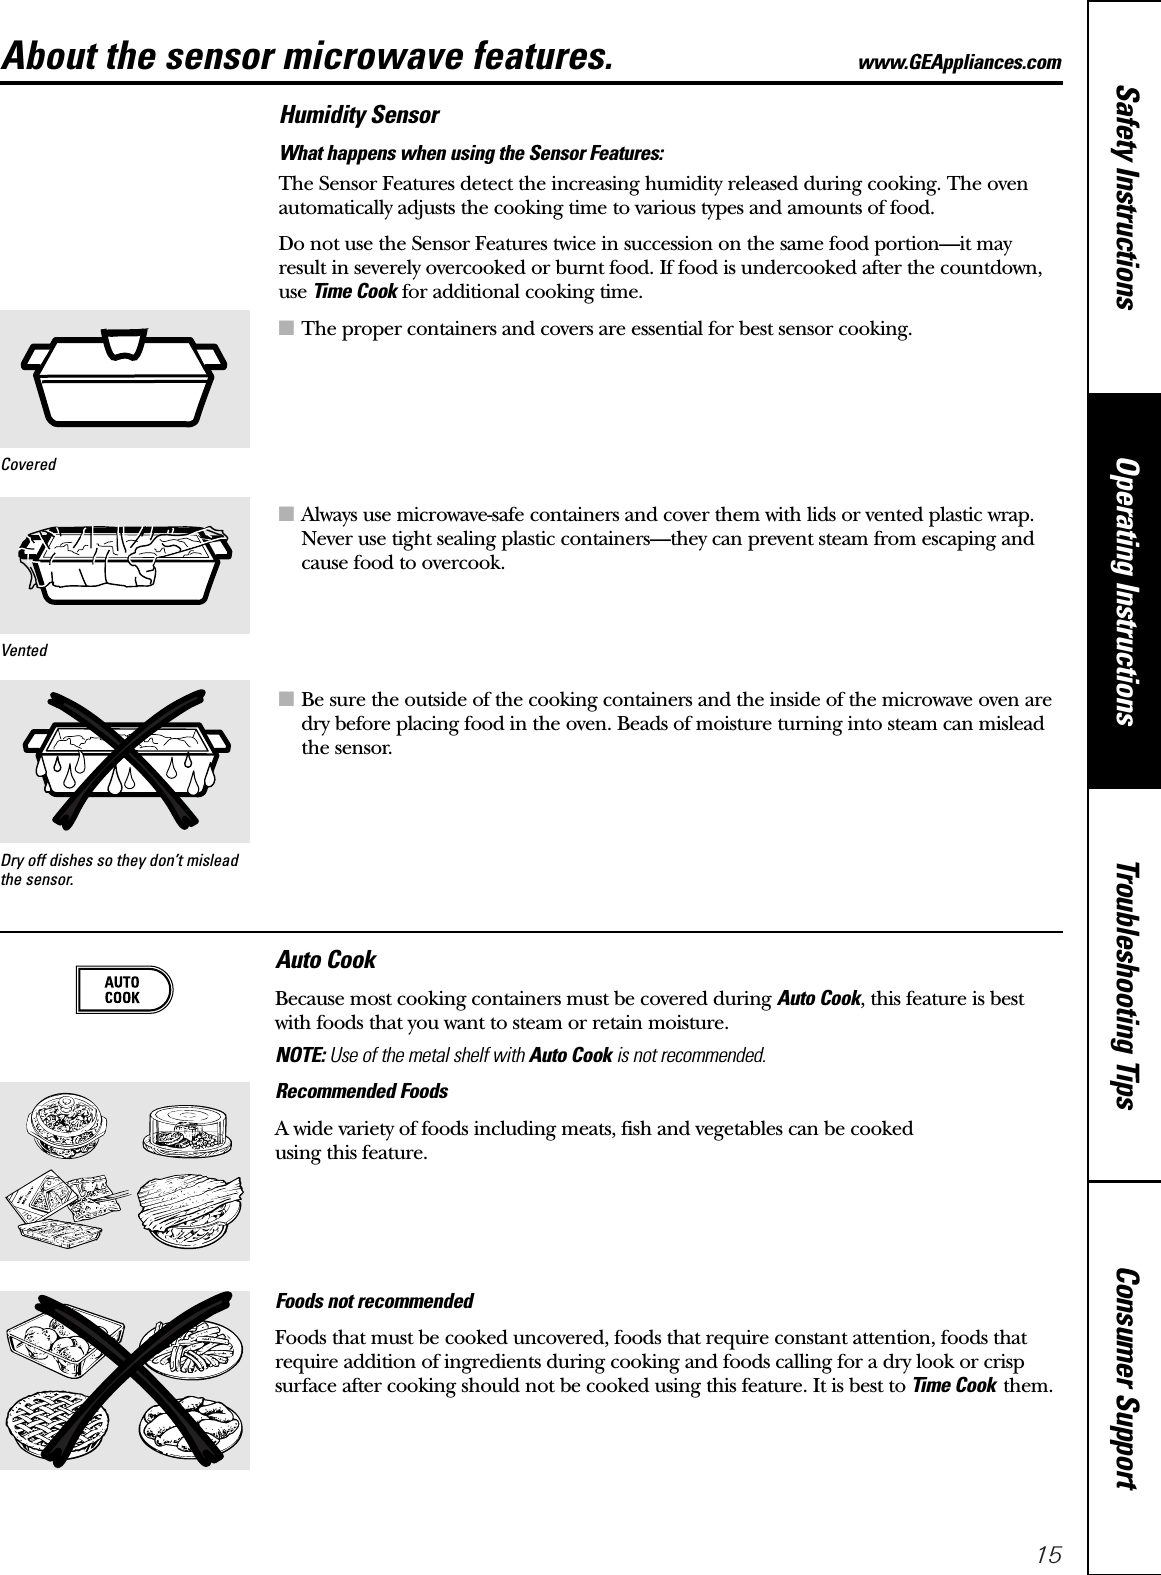 15Consumer SupportTroubleshooting TipsOperating InstructionsSafety InstructionsAbout the sensor microwave features. www.GEAppliances.comHumidity SensorWhat happens when using the Sensor Features:The Sensor Features detect the increasing humidity released during cooking. The ovenautomatically adjusts the cooking time to various types and amounts of food.Do not use the Sensor Features twice in succession on the same food portion—it mayresult in severely overcooked or burnt food. If food is undercooked after the countdown,use Time Cook for additional cooking time.■The proper containers and covers are essential for best sensor cooking.■Always use microwave-safe containers and cover them with lids or vented plastic wrap.Never use tight sealing plastic containers—they can prevent steam from escaping andcause food to overcook.■Be sure the outside of the cooking containers and the inside of the microwave oven aredry before placing food in the oven. Beads of moisture turning into steam can misleadthe sensor.Dry off dishes so they don’t misleadthe sensor.VentedCoveredAuto CookBecause most cooking containers must be covered during Auto Cook, this feature is bestwith foods that you want to steam or retain moisture.NOTE: Use of the metal shelf with Auto Cook is not recommended.Recommended FoodsA wide variety of foods including meats, fish and vegetables can be cooked using this feature.Foods not recommended Foods that must be cooked uncovered, foods that require constant attention, foods thatrequire addition of ingredients during cooking and foods calling for a dry look or crispsurface after cooking should not be cooked using this feature. It is best to Time Cook them.